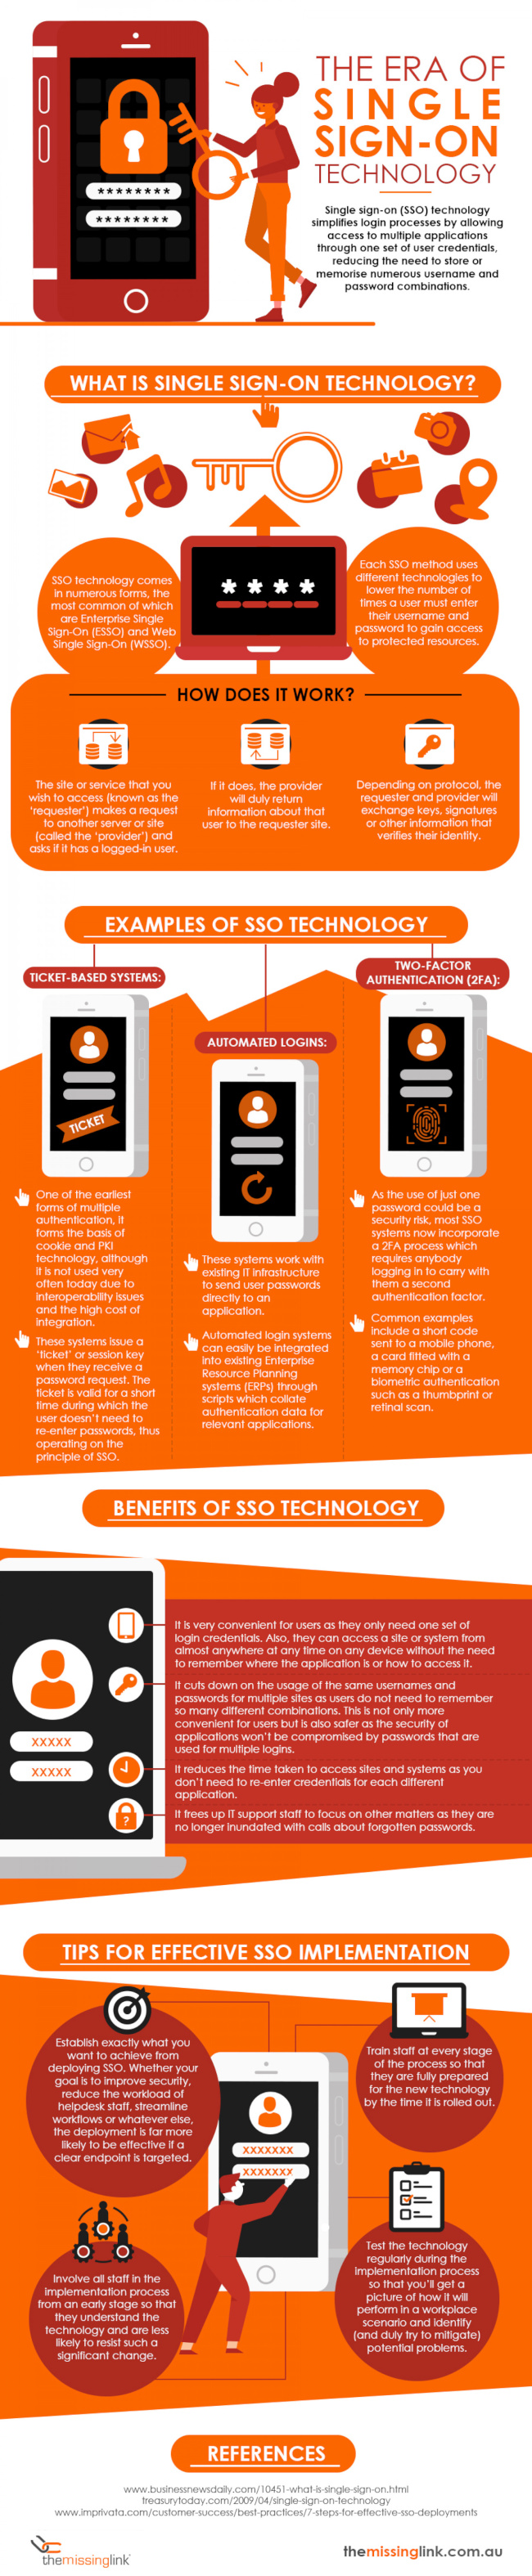 The Era of Single Sign-On Technology [Infographic]